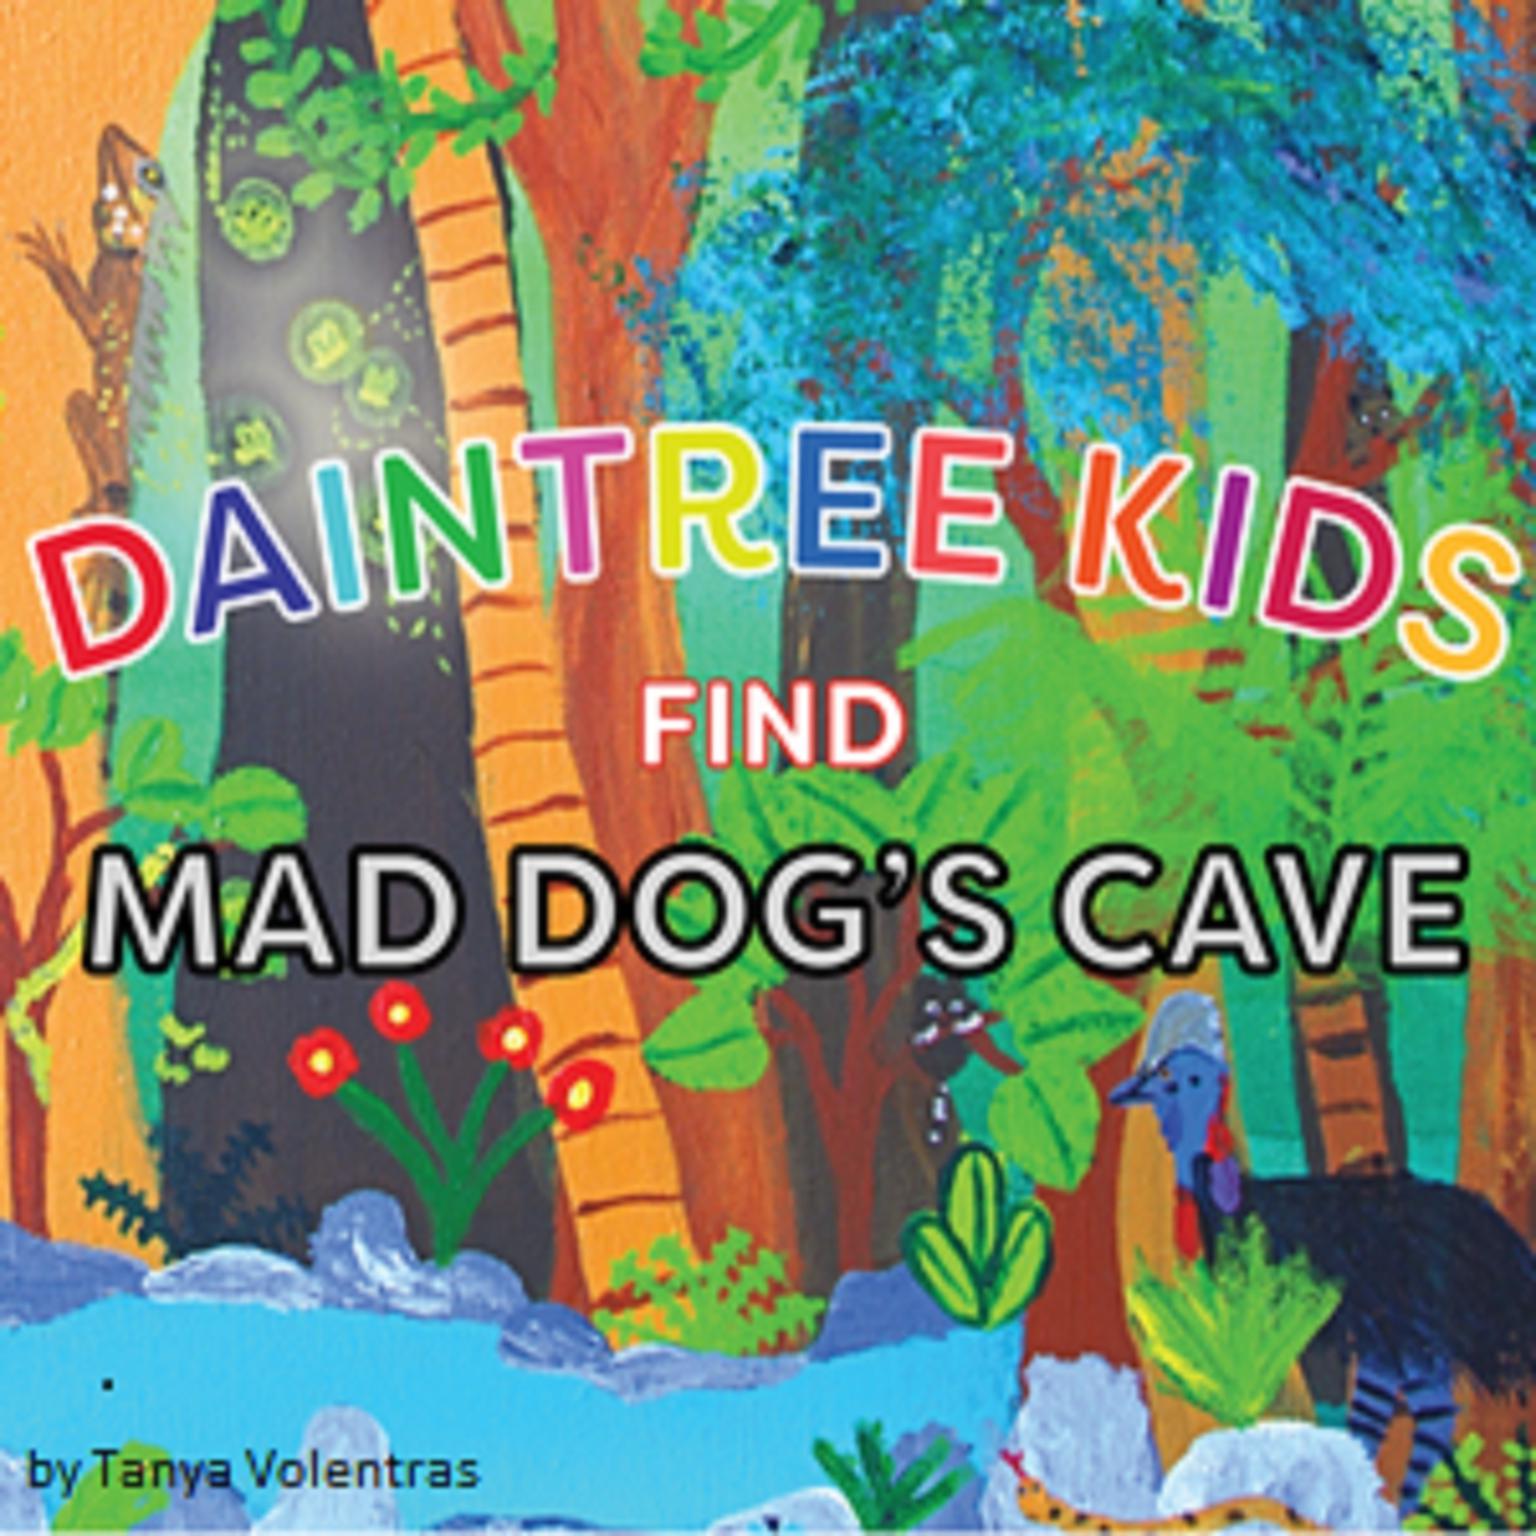 Daintree Kids Find Mad Dogs Cave Audiobook, by Tanya Volentras